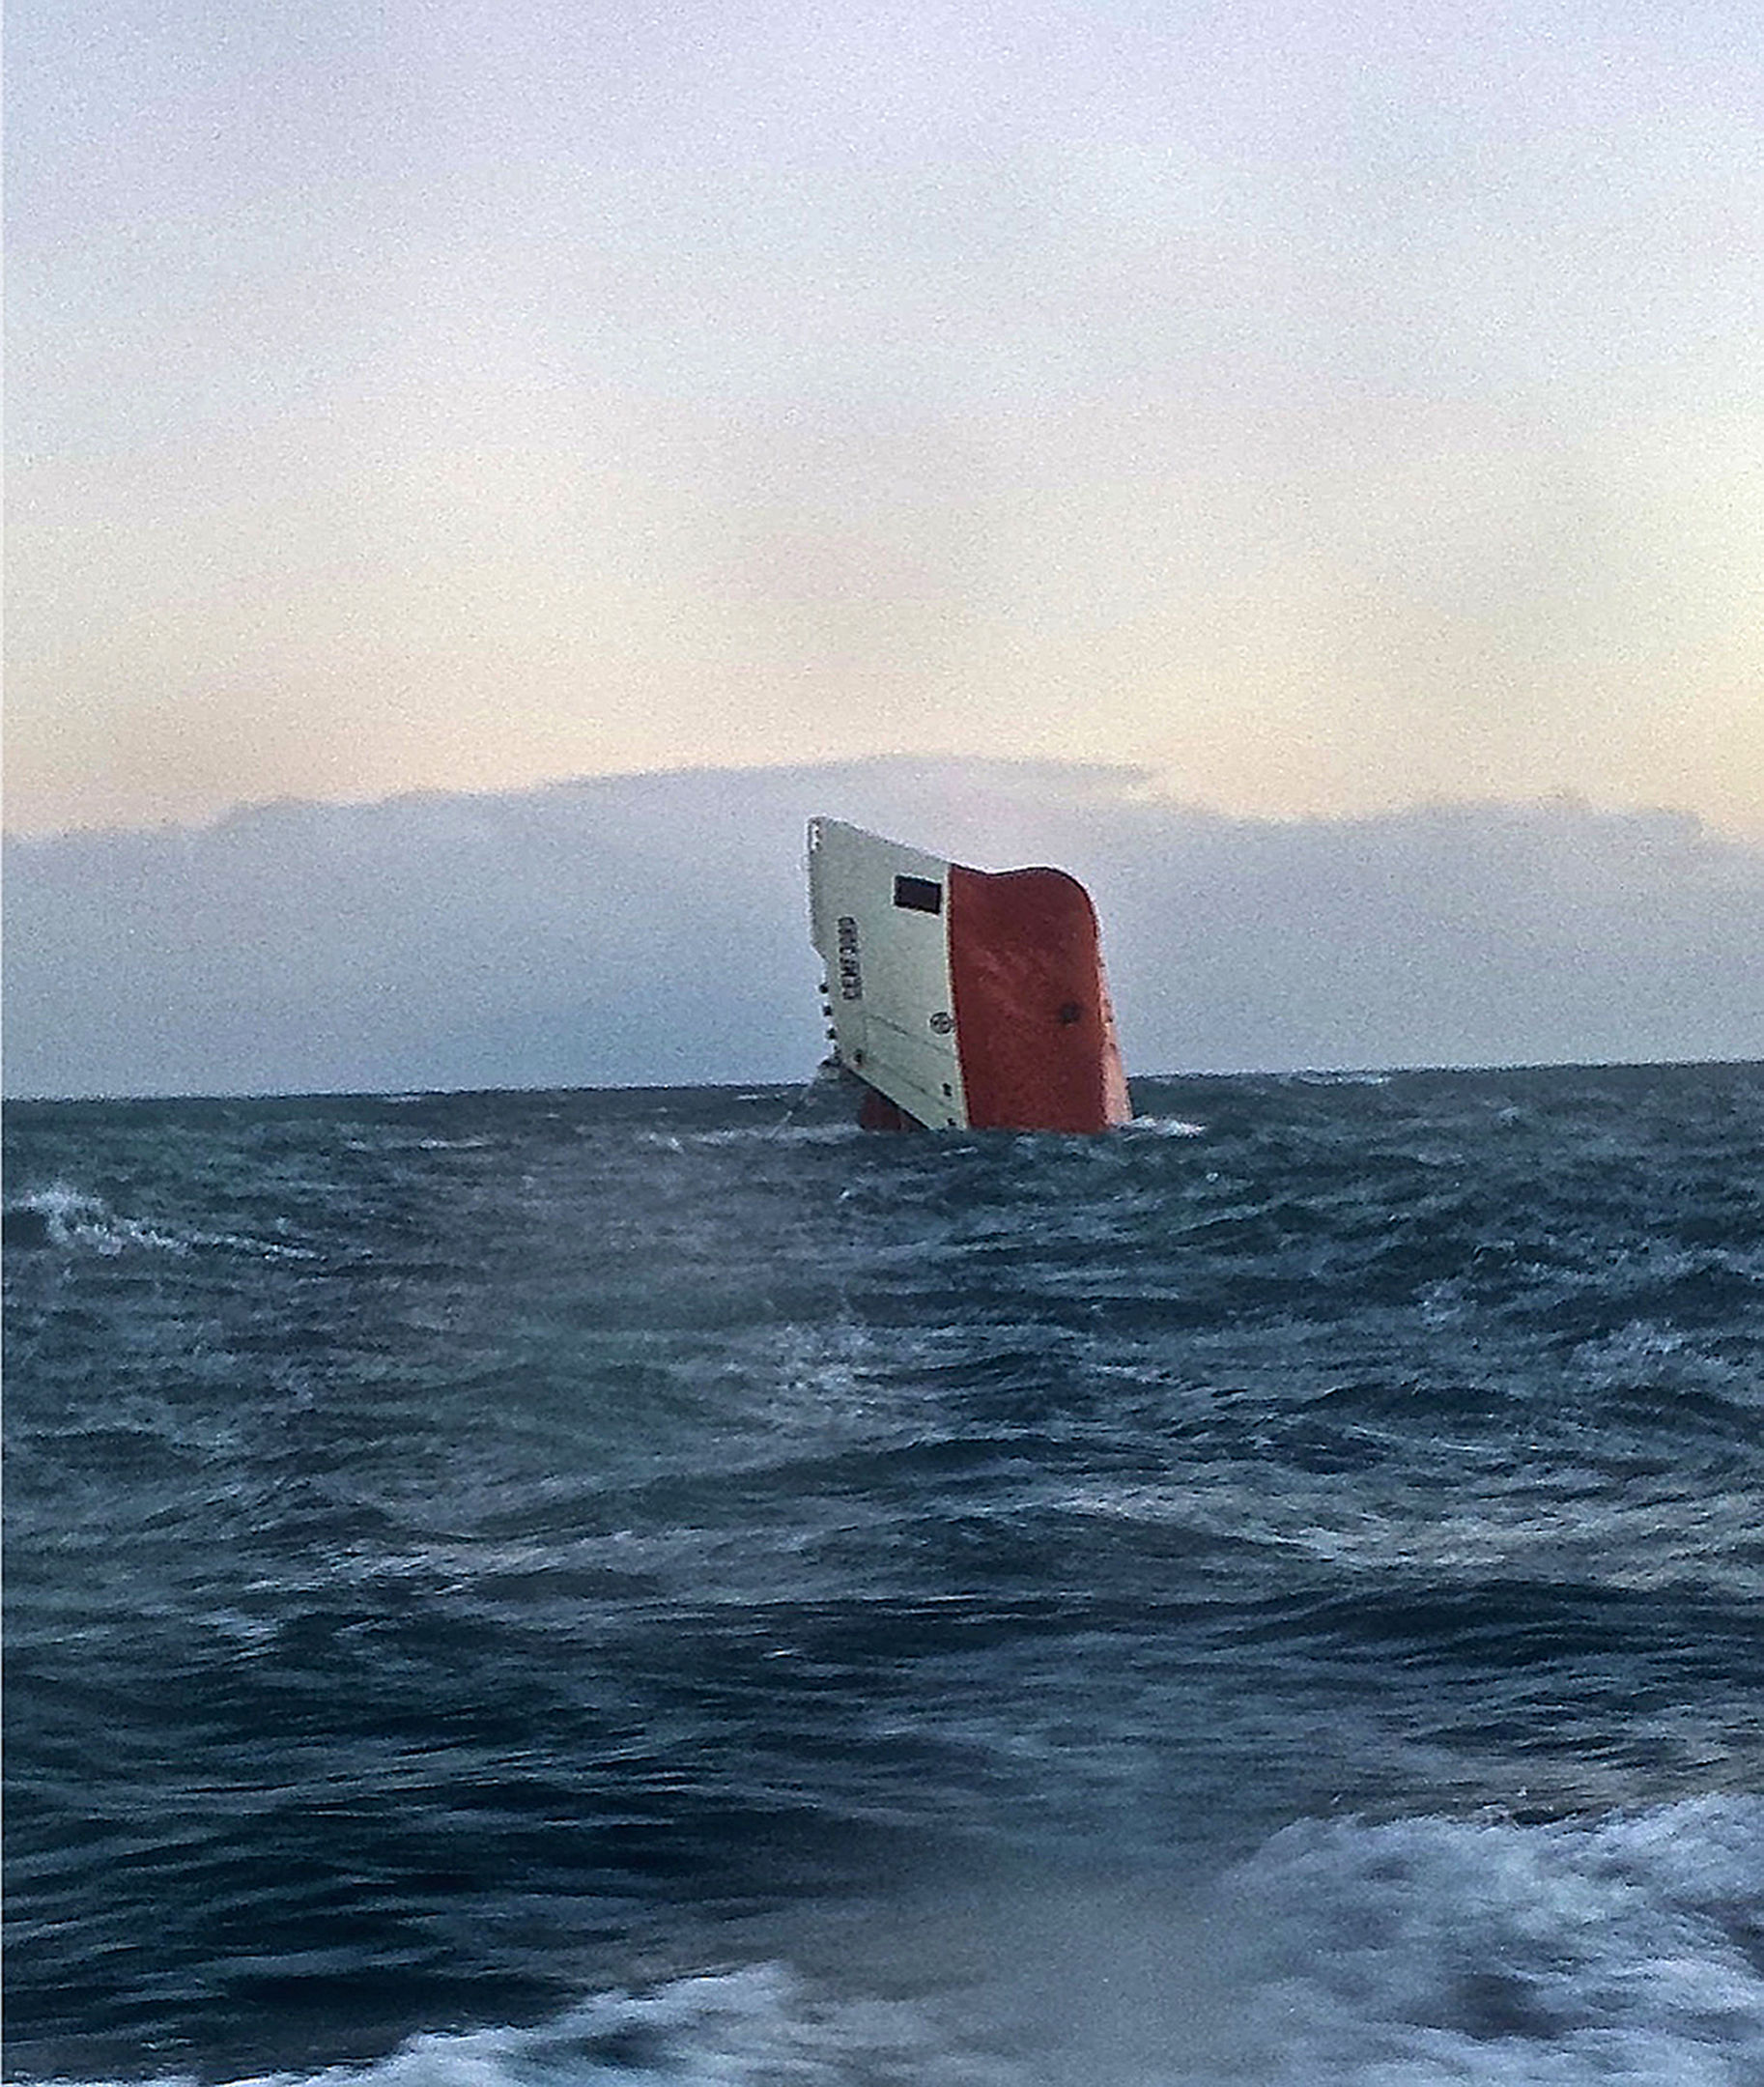 The Cemfjord cargo ship  overturned off the north coast of Scotland.